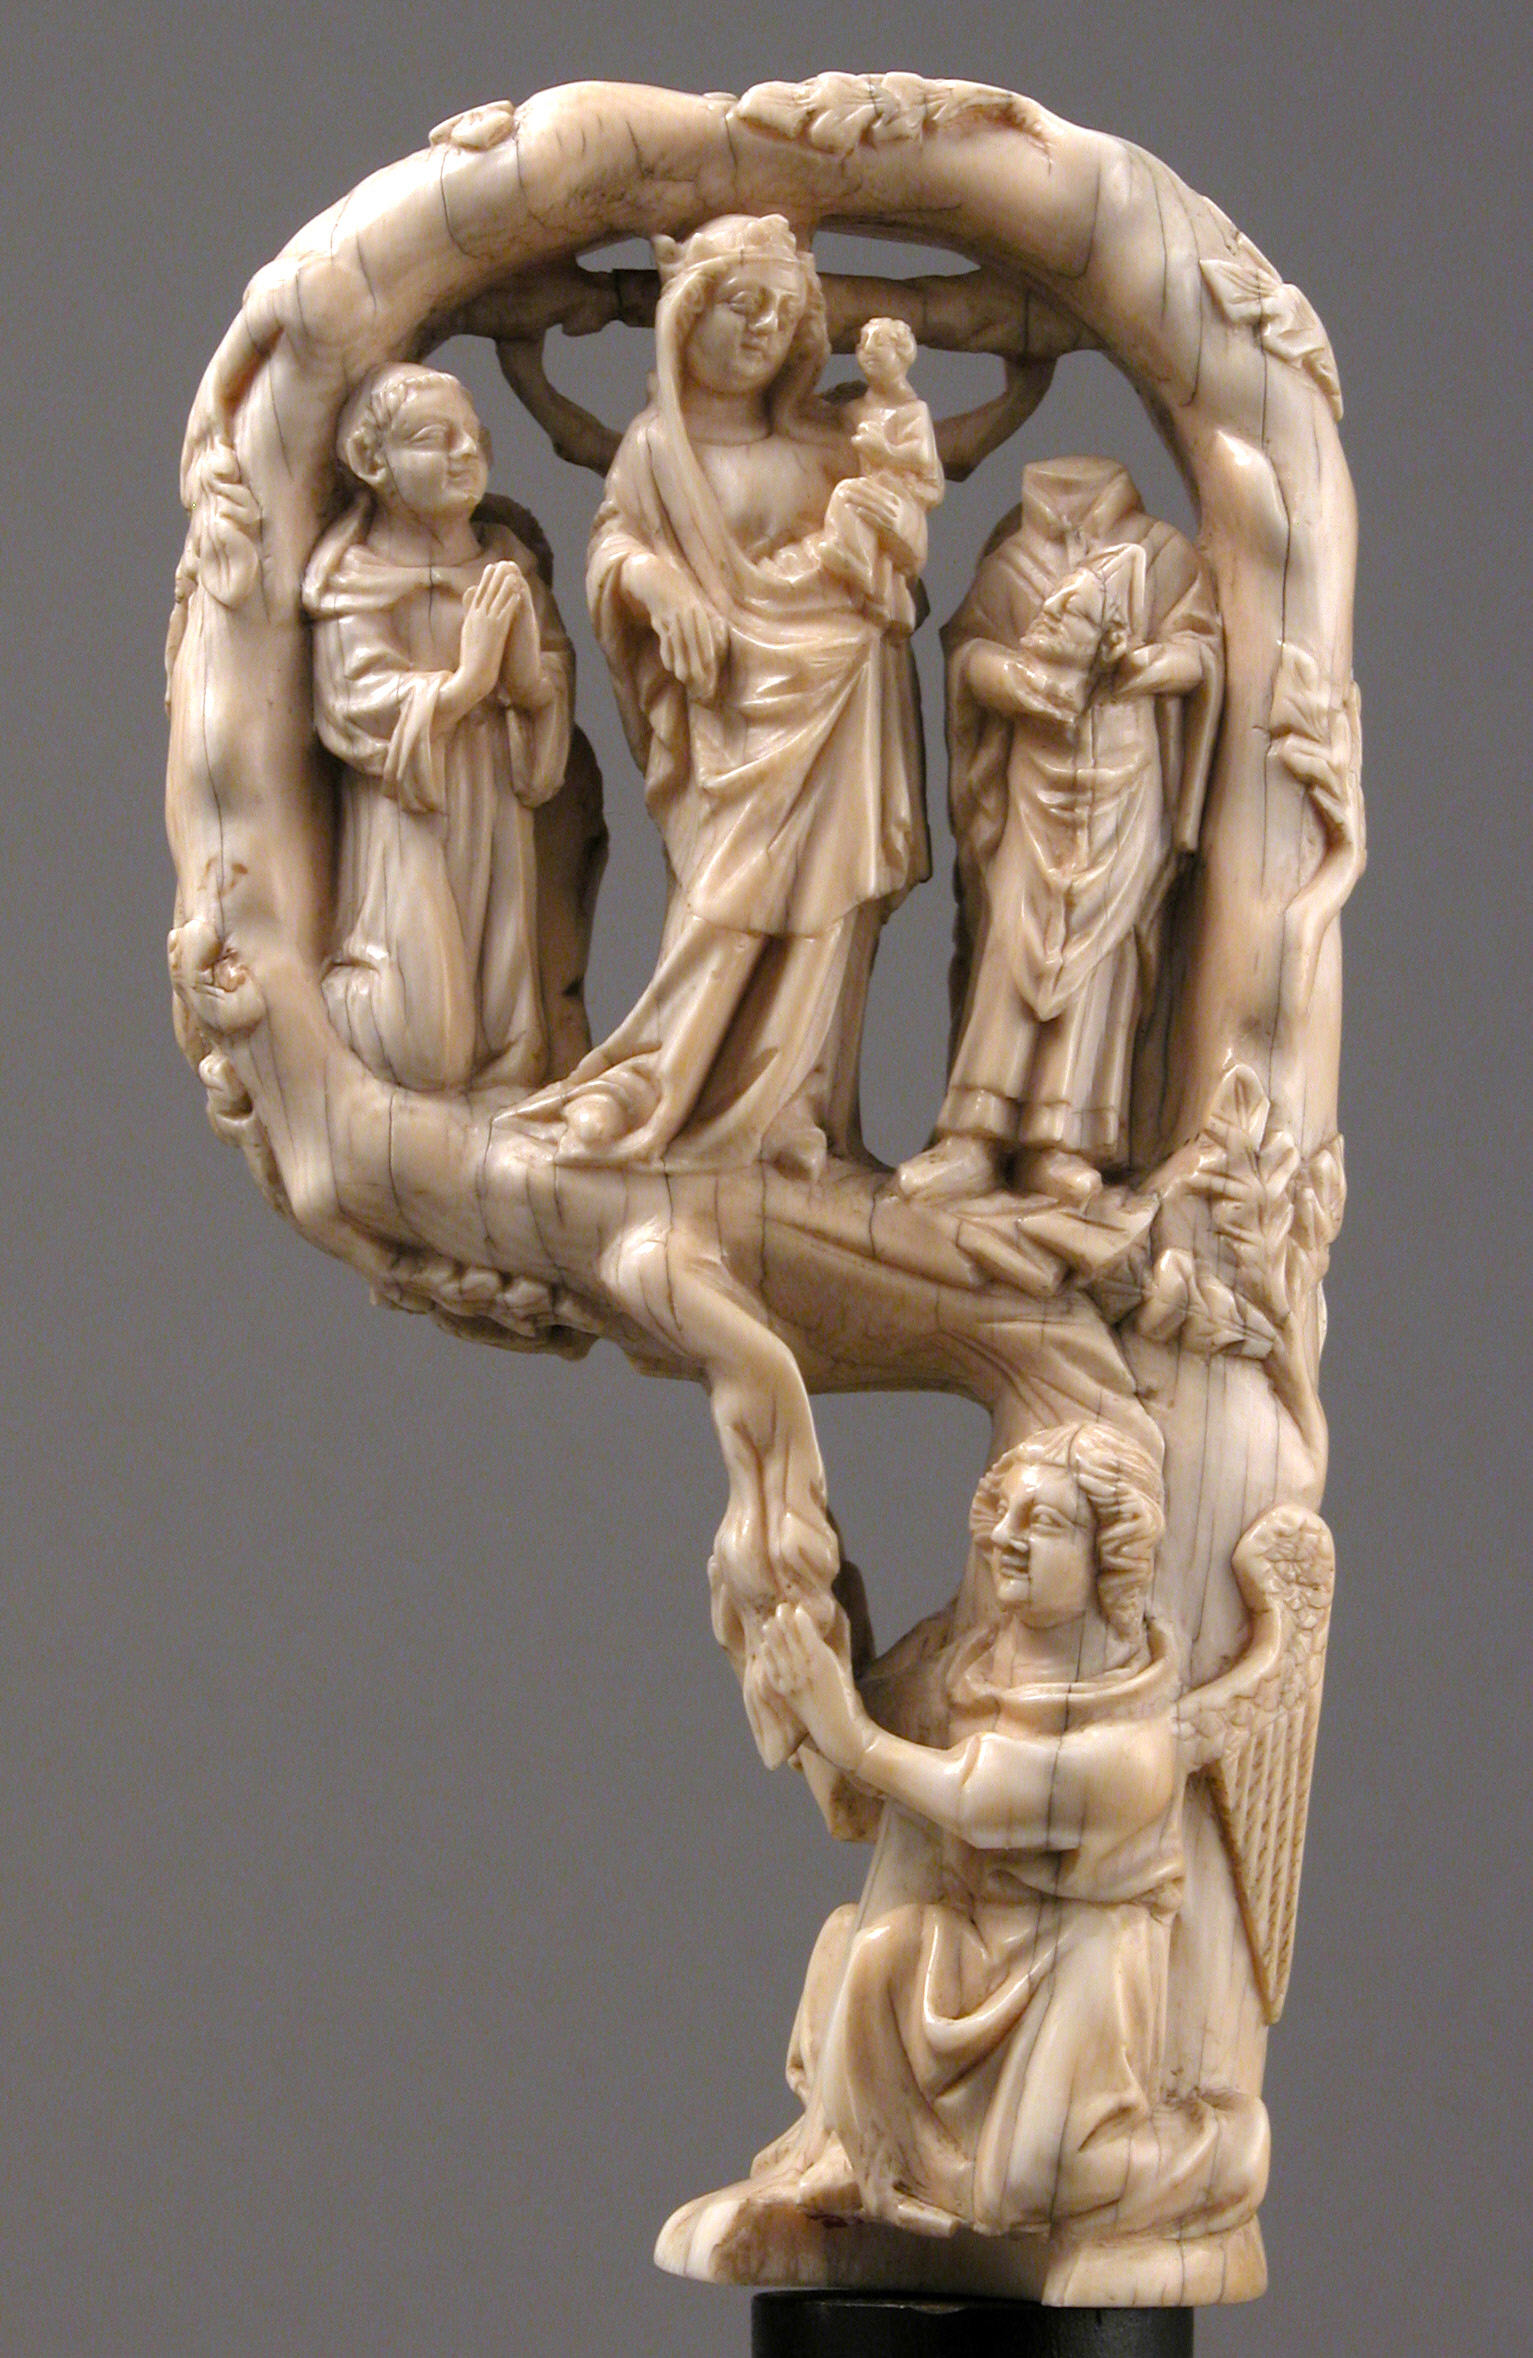 Crozier Head: The Virgin Mary and the Infant Christ by Unknown Artist - c. 1350 - 14.8 x 8 x 3.8 cm Metropolitan Museum of Art